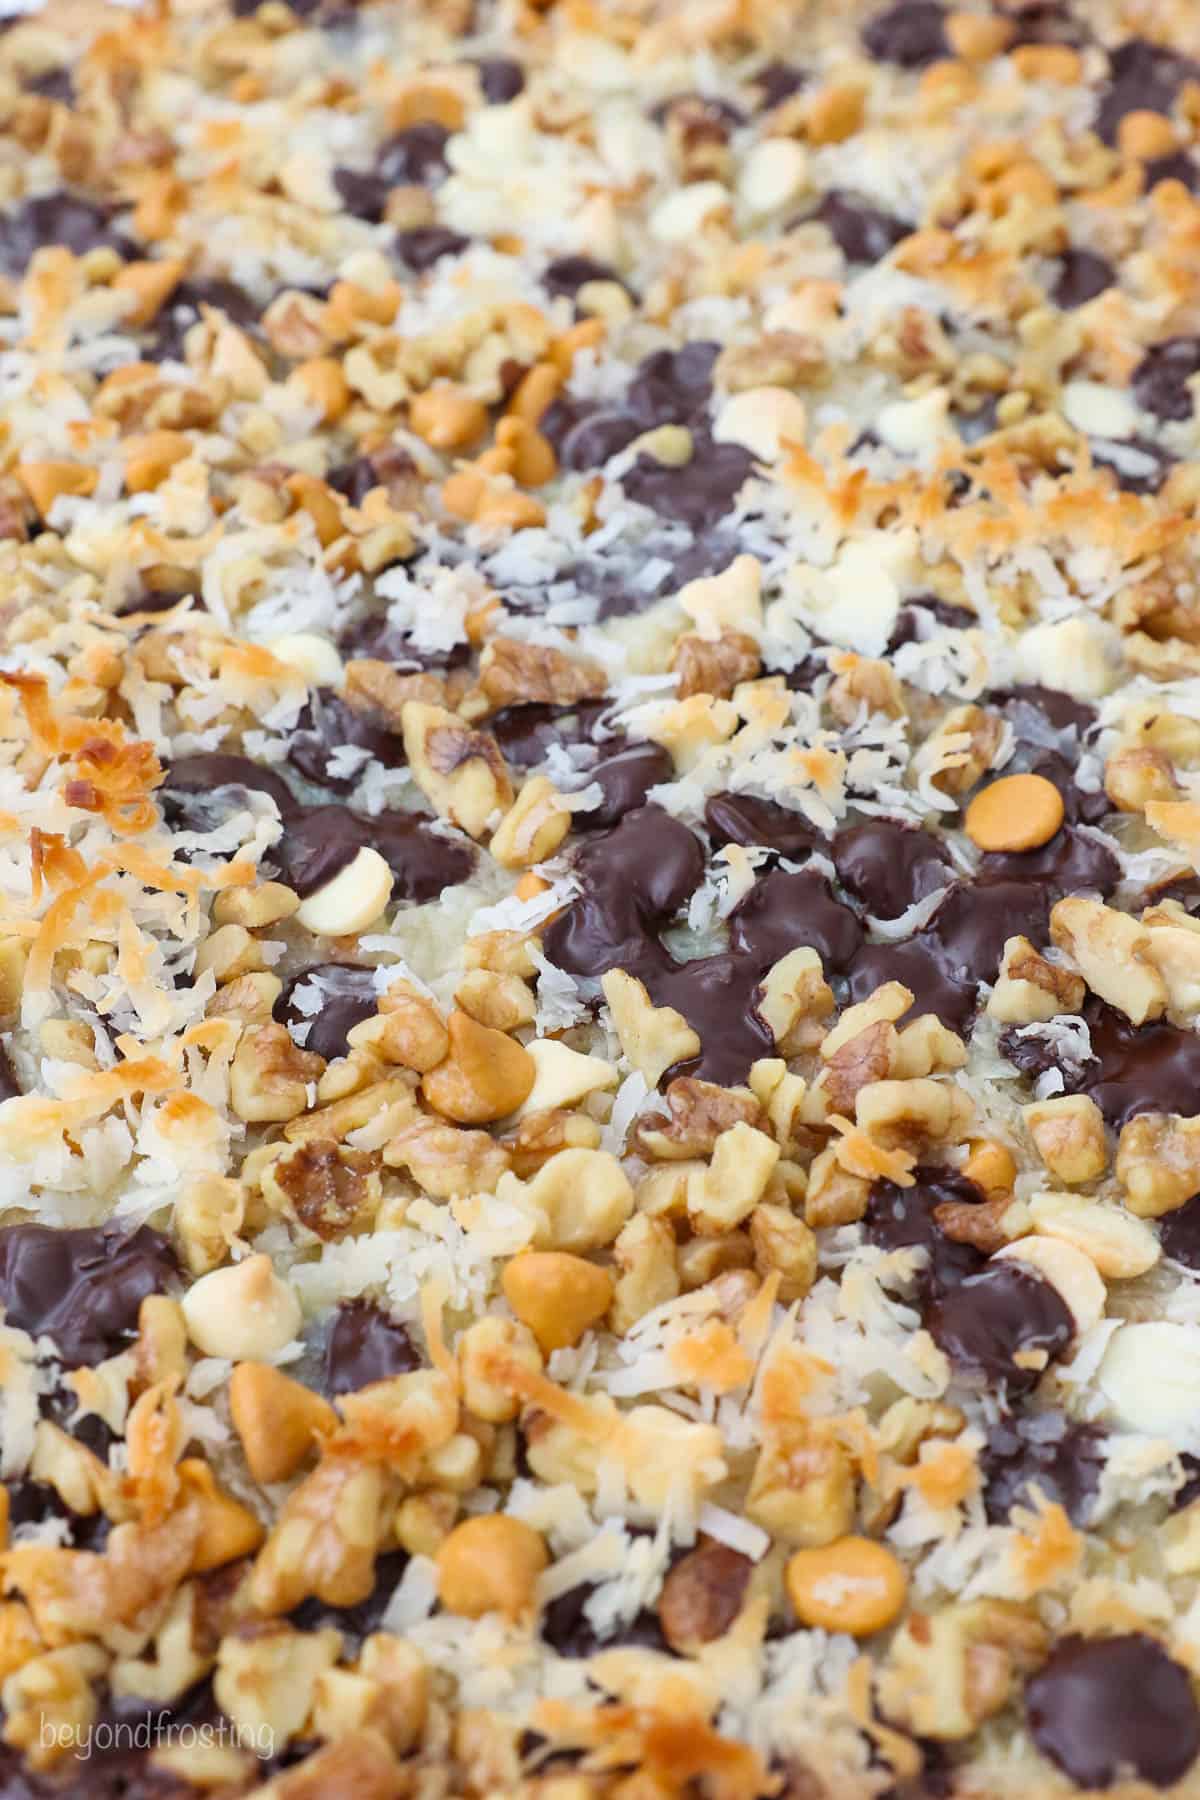 A close-up shot of the freshly-baked seven layer bars before they've been cut